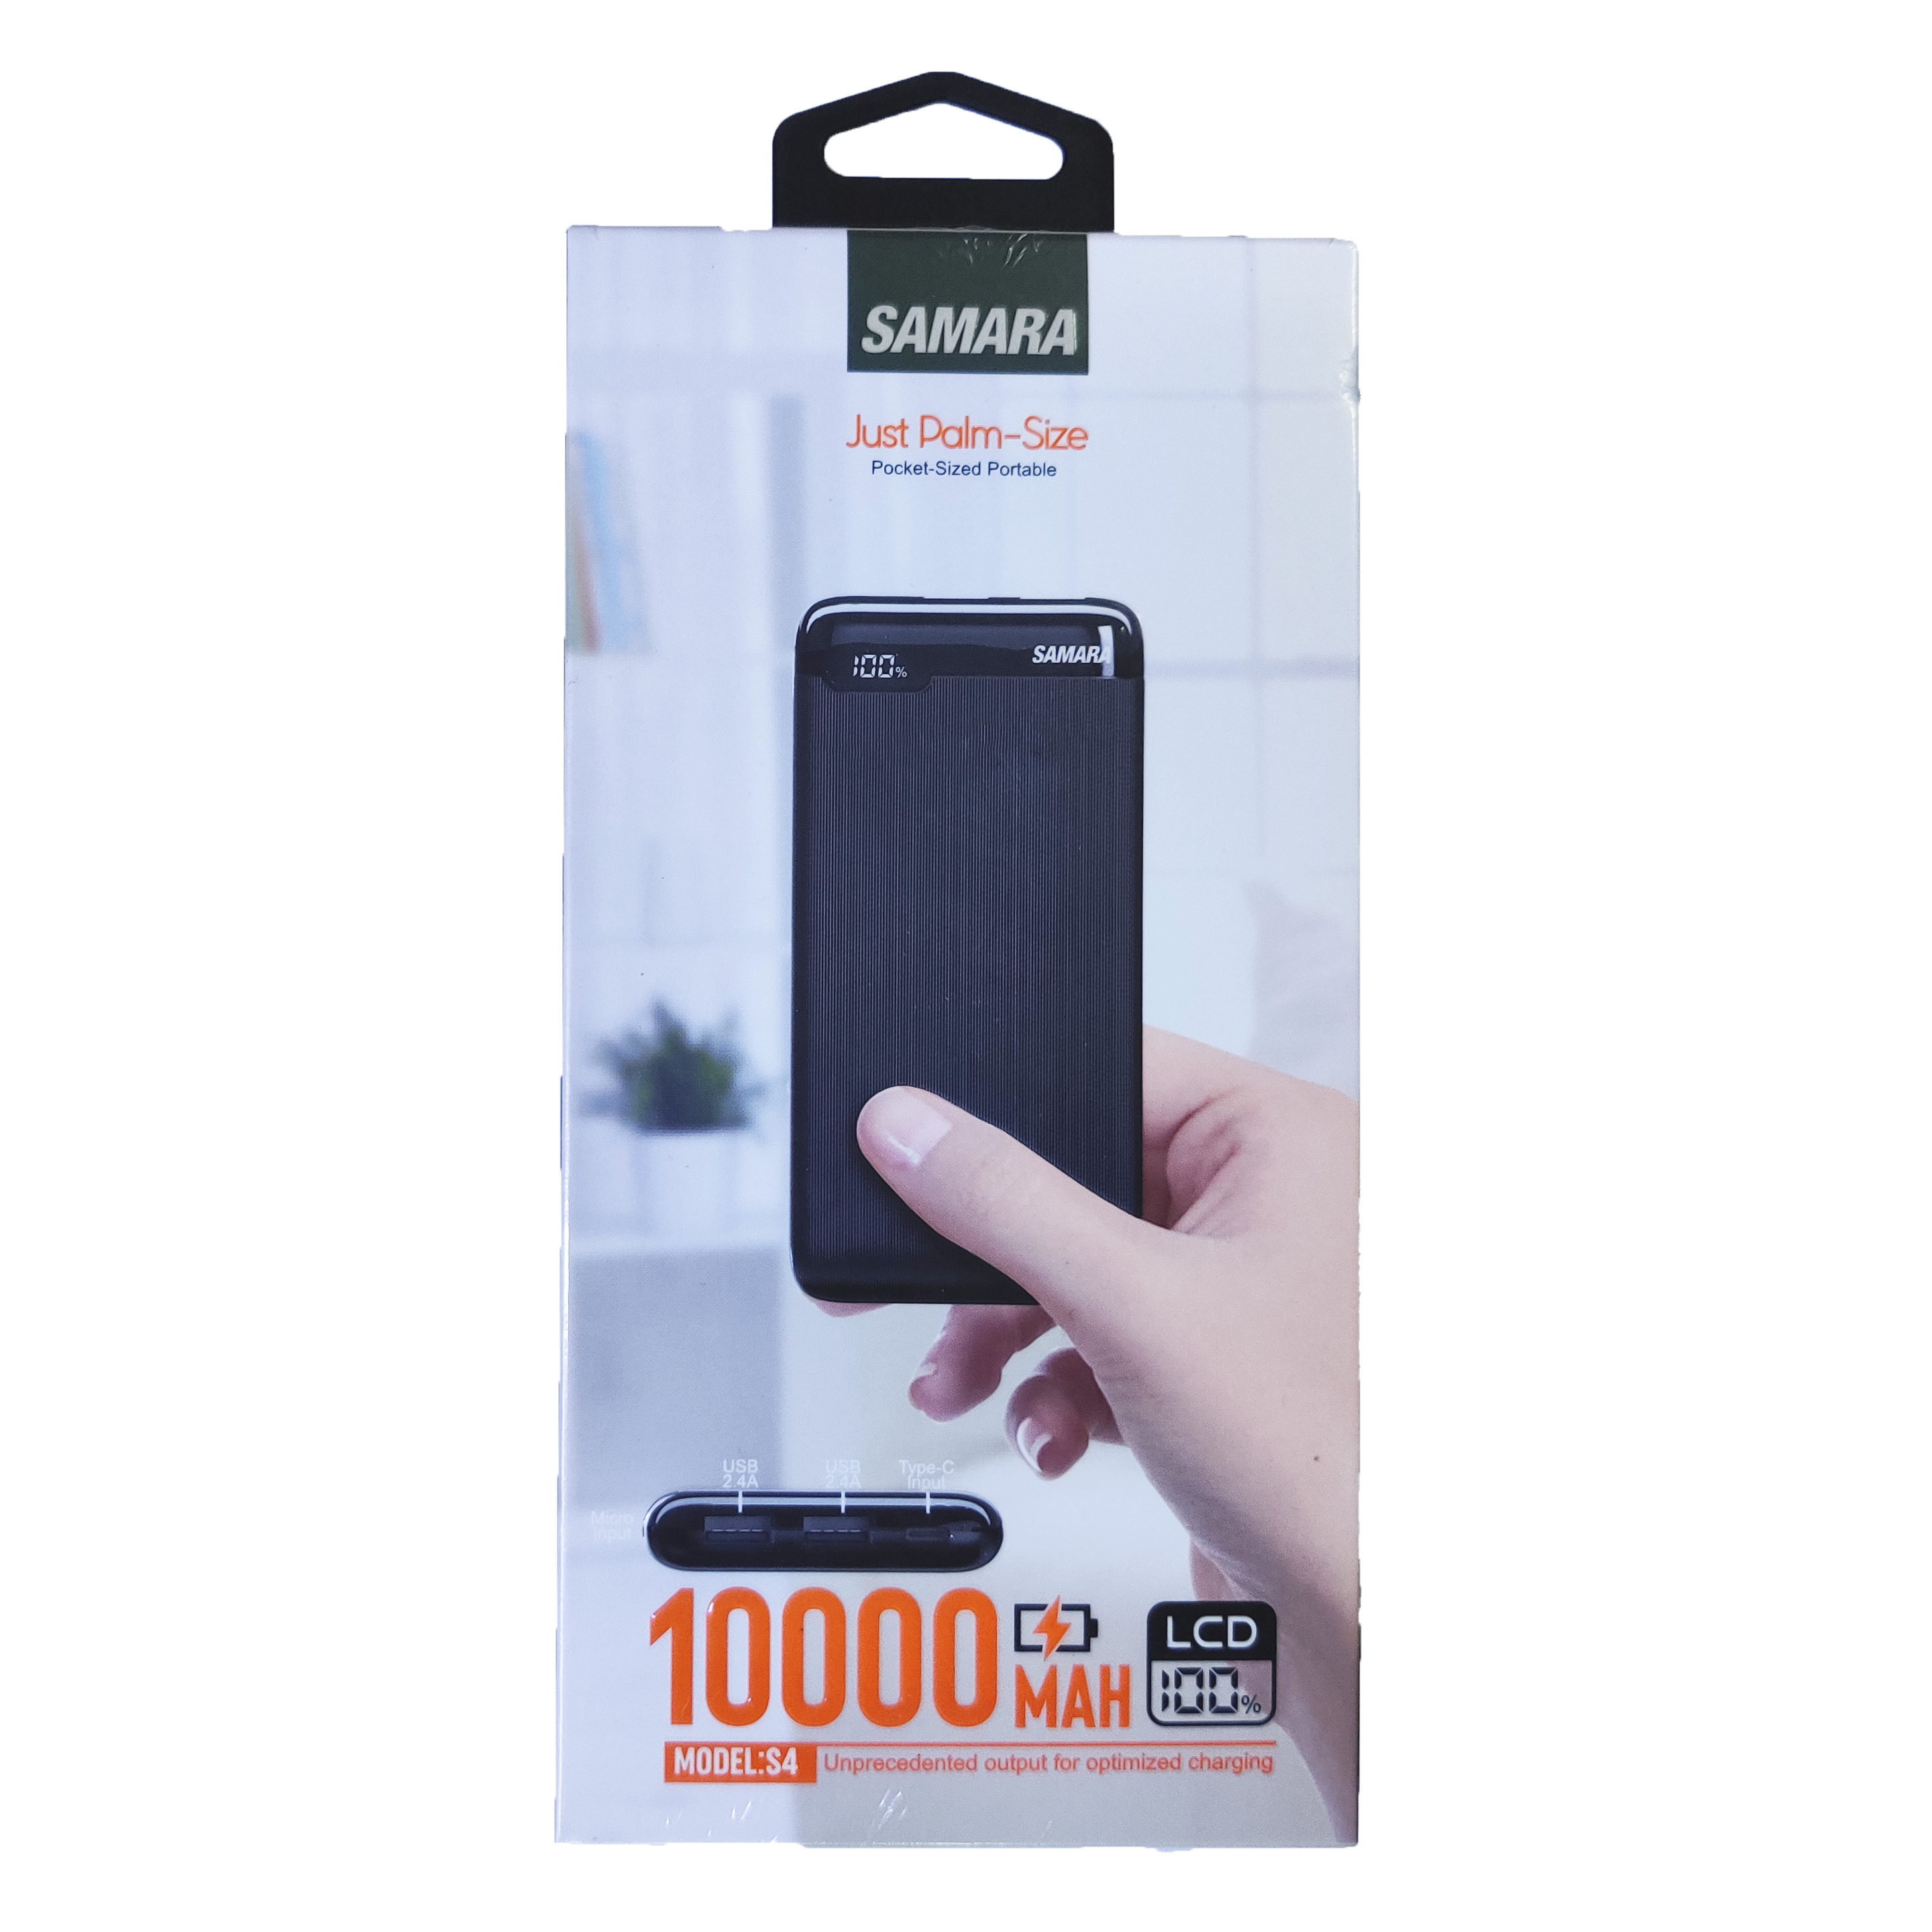 EXTERNAL BATTERY SAMARA 10000 MAH FOR SMART DEVICES POWER BANK WITH LCD S4 ,Smartphones & Tab Power Banks